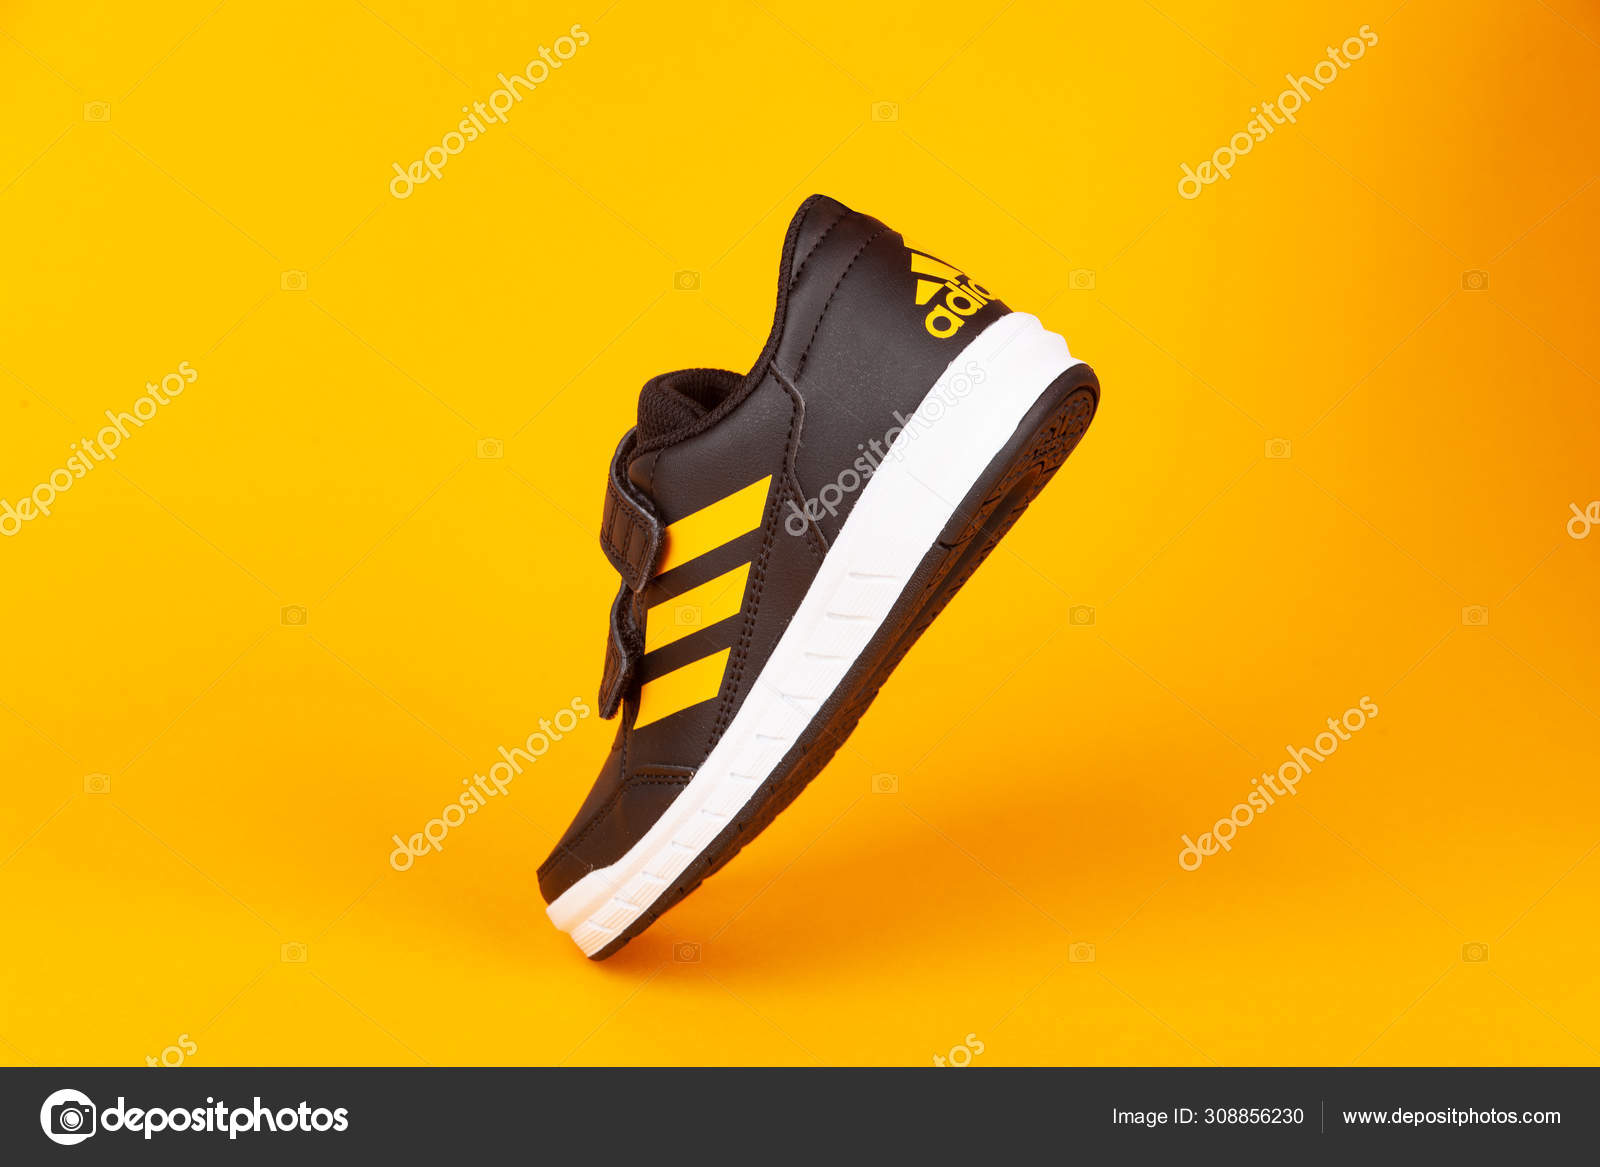 Voorkomen definitief pepermunt Varna , Bulgaria - AUGUST 13, 2019 : ADIDAS ALTA SPORT shoe, on yellow  background. Product shot. Adidas is a German corporation that designs and  manufactures sports shoes, clothing and accessories – Stock Editorial Photo  © dechevm #308856230